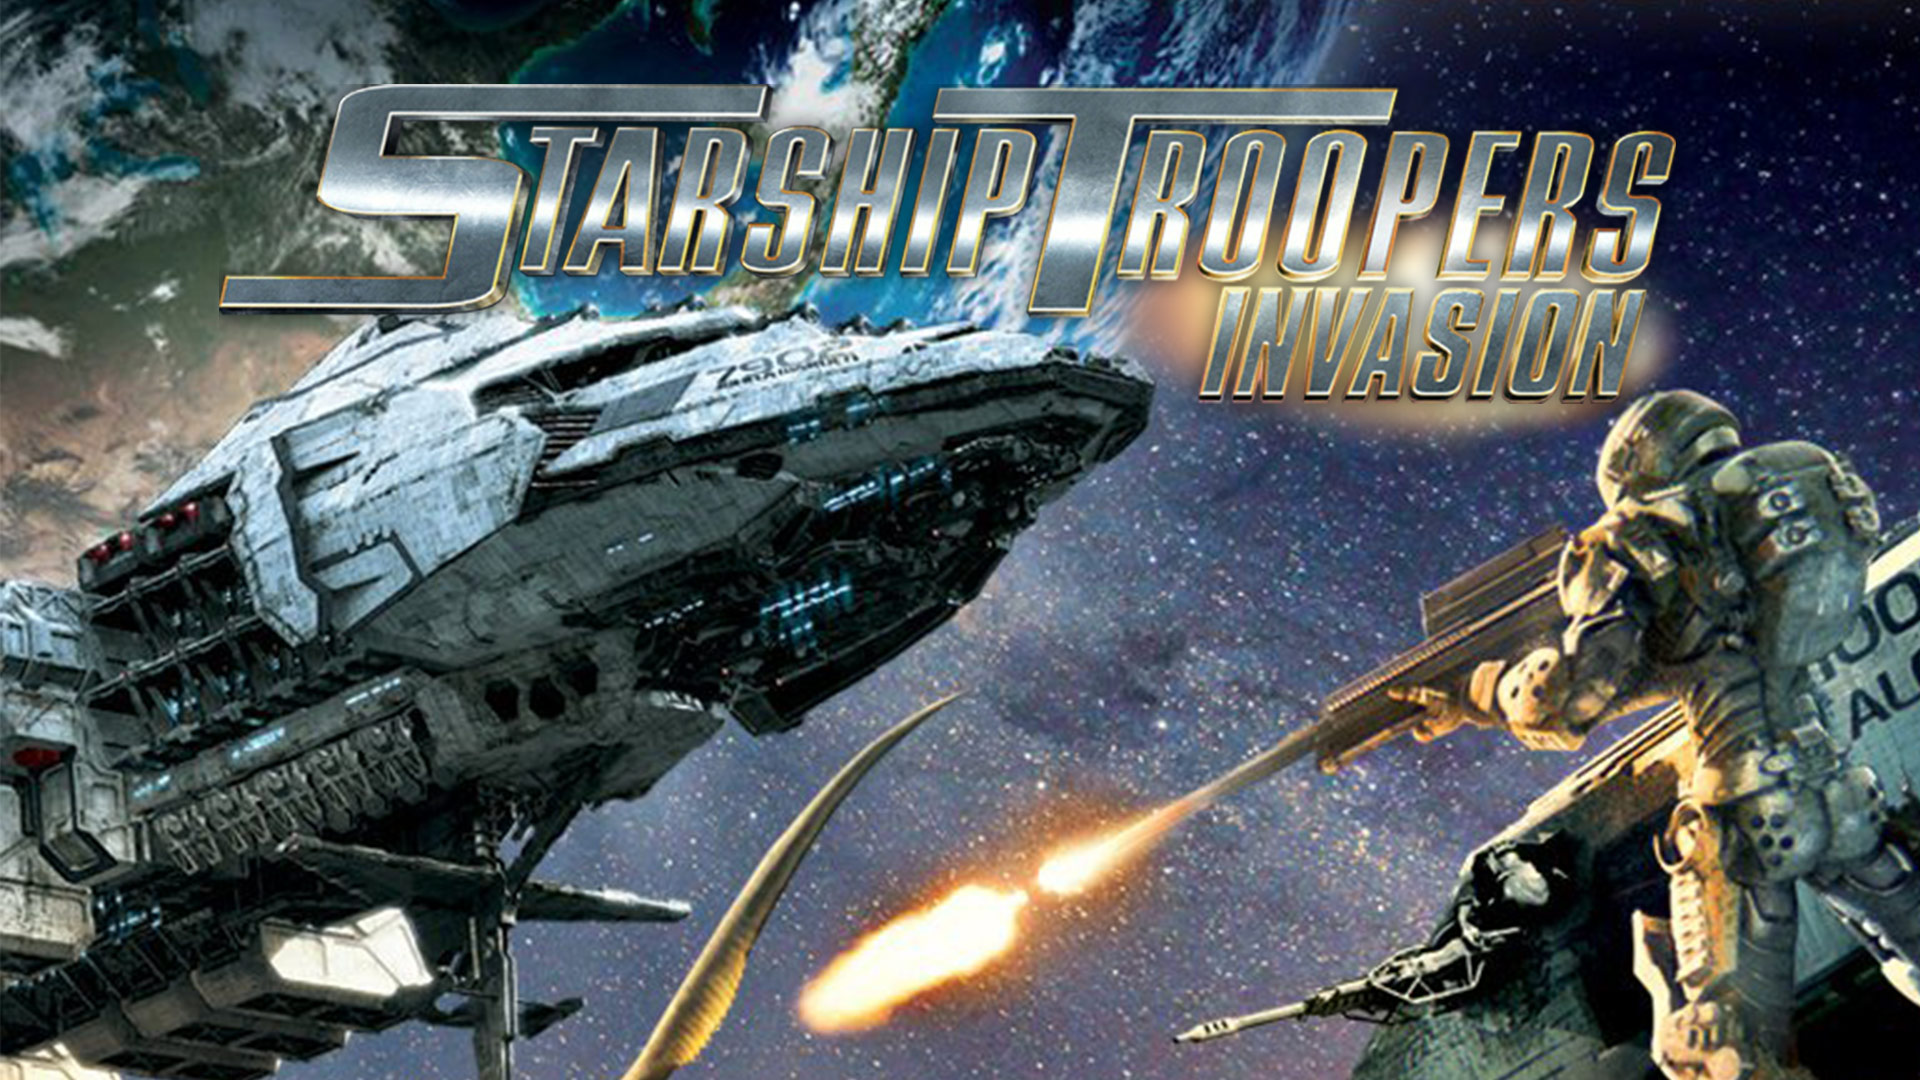 Starship Troopers: Invasion Wallpapers